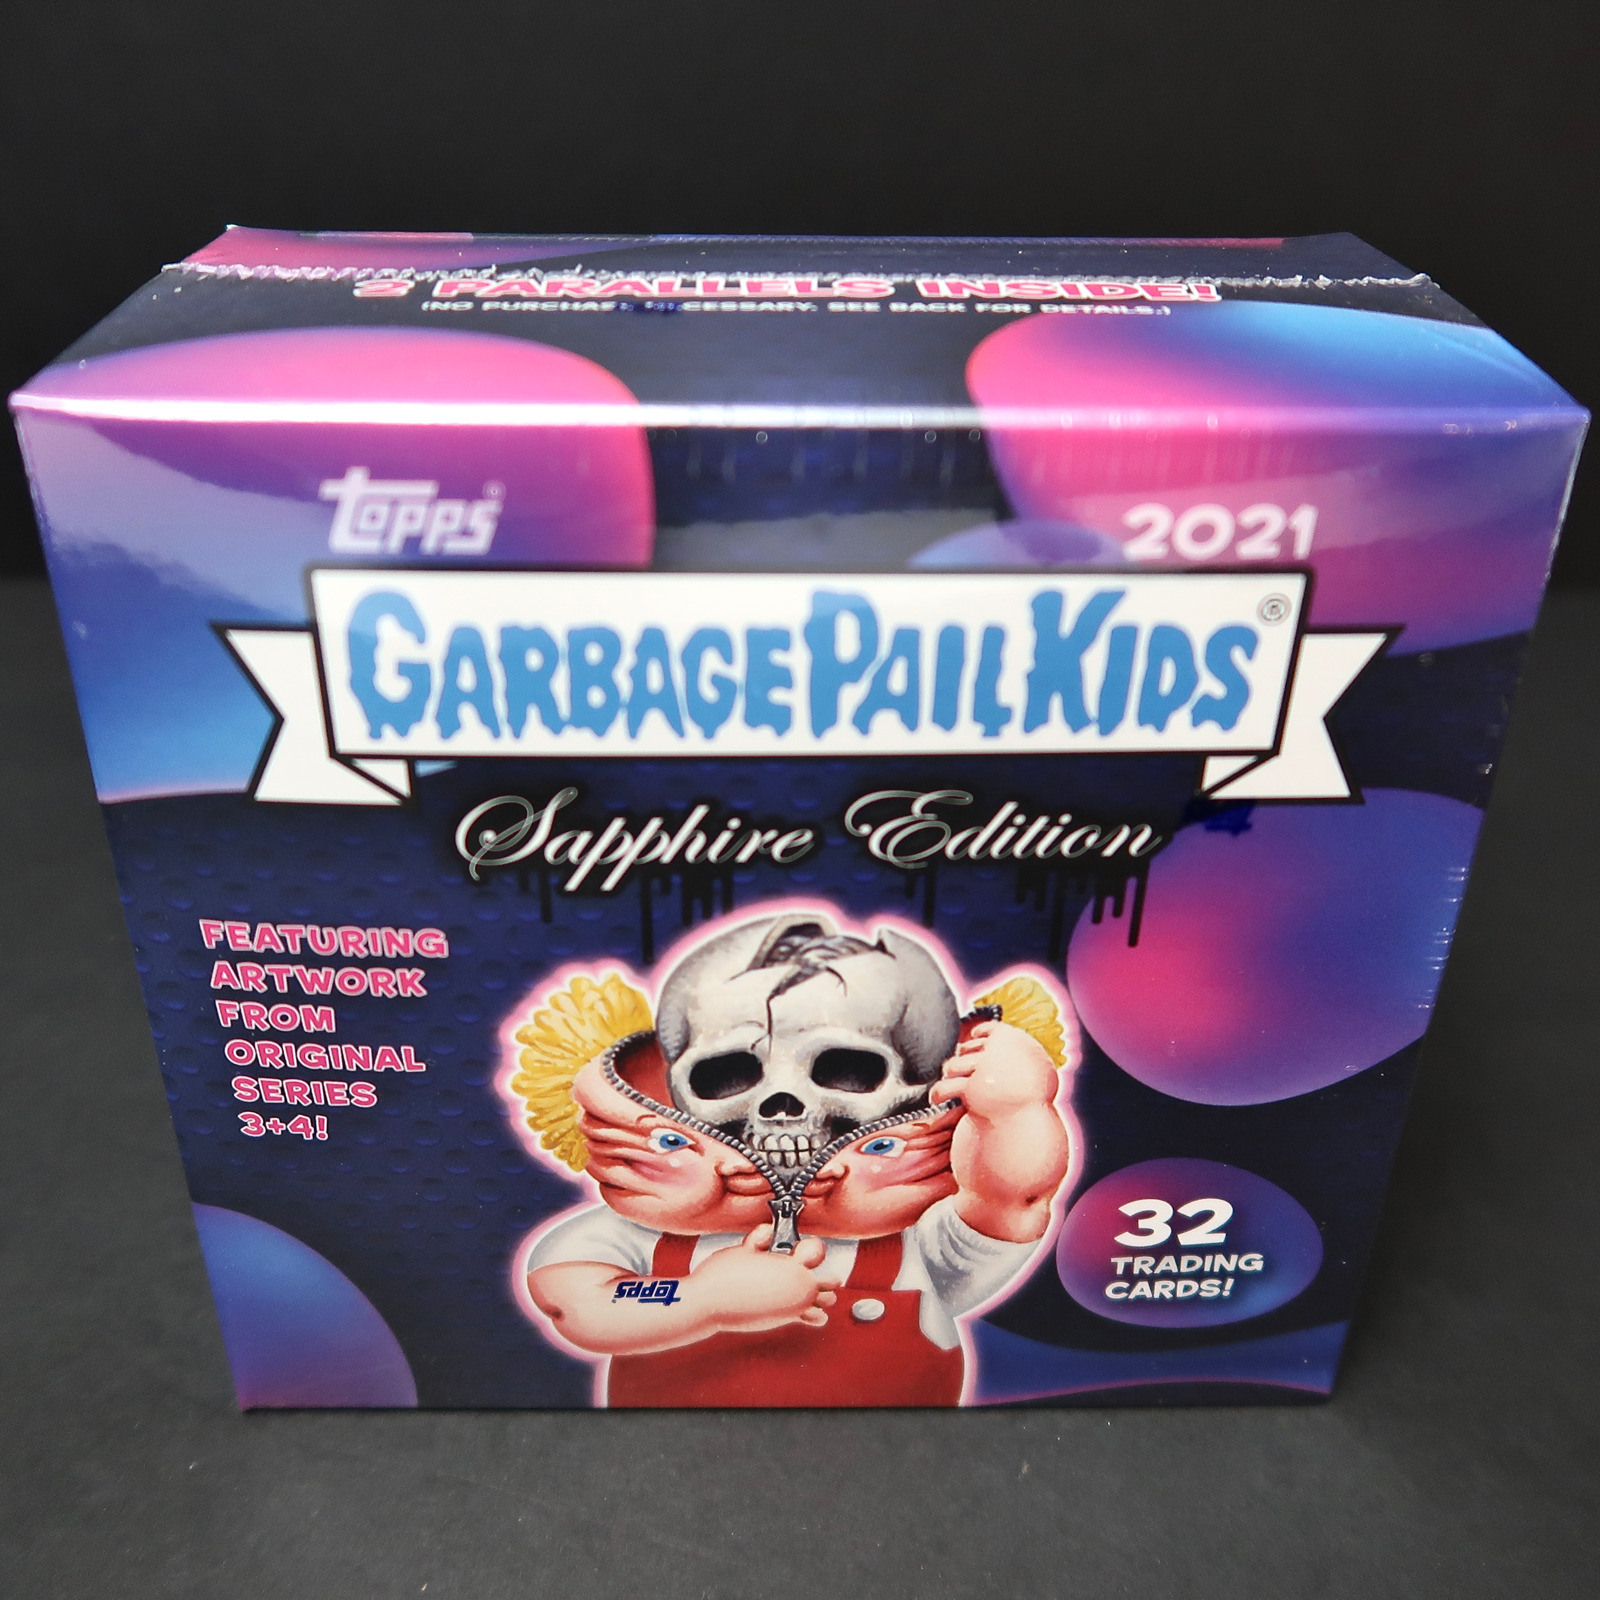 2021 Garbage Pail Kids Sapphire 2 Edition Factory Sealed Box